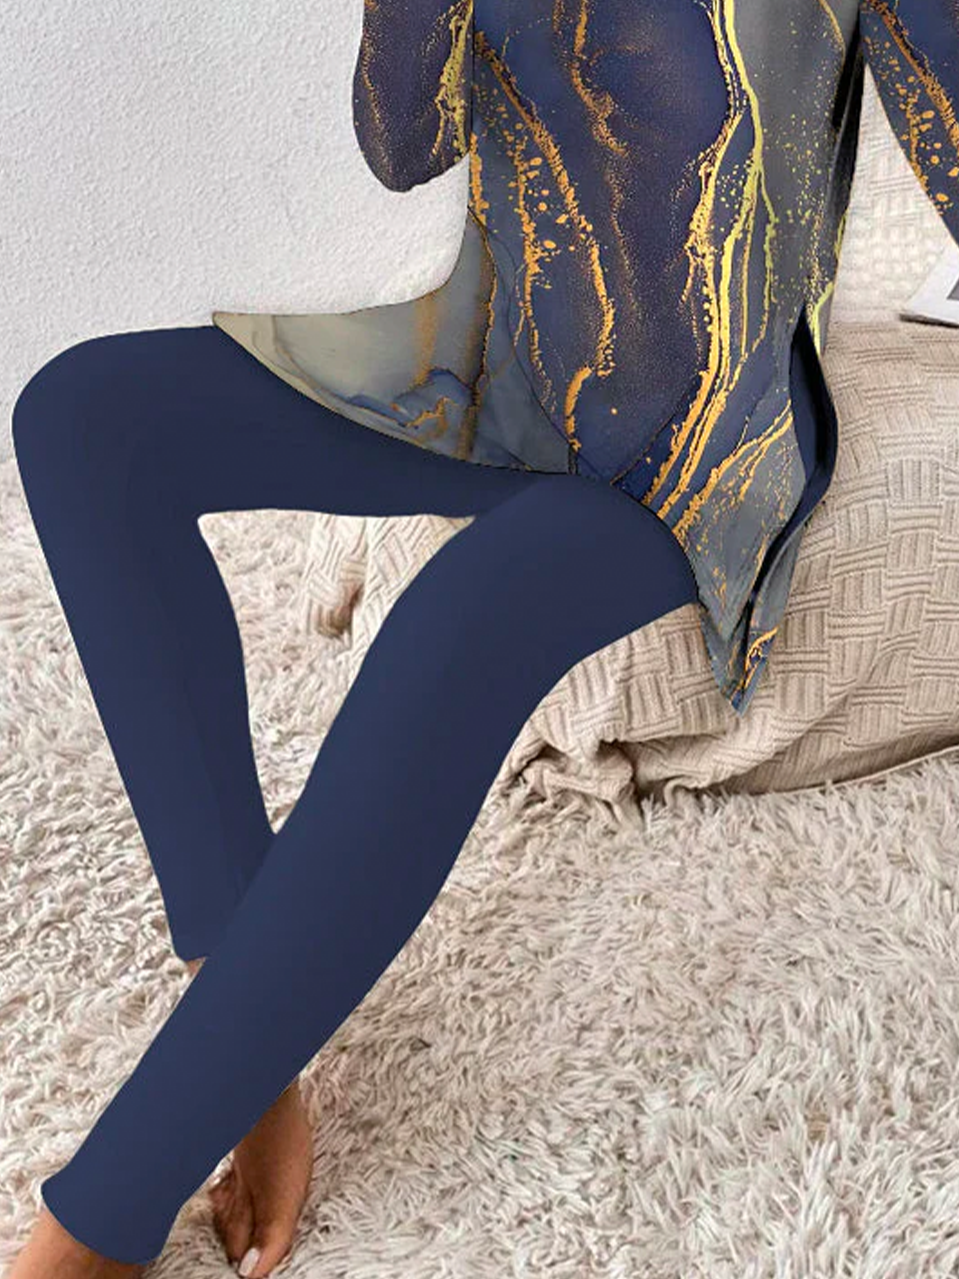 Women's Jersey Abstract Daily Going Out Two Piece Set Long Sleeve Casual Spring/Fall Top With Pants Matching Set Blue